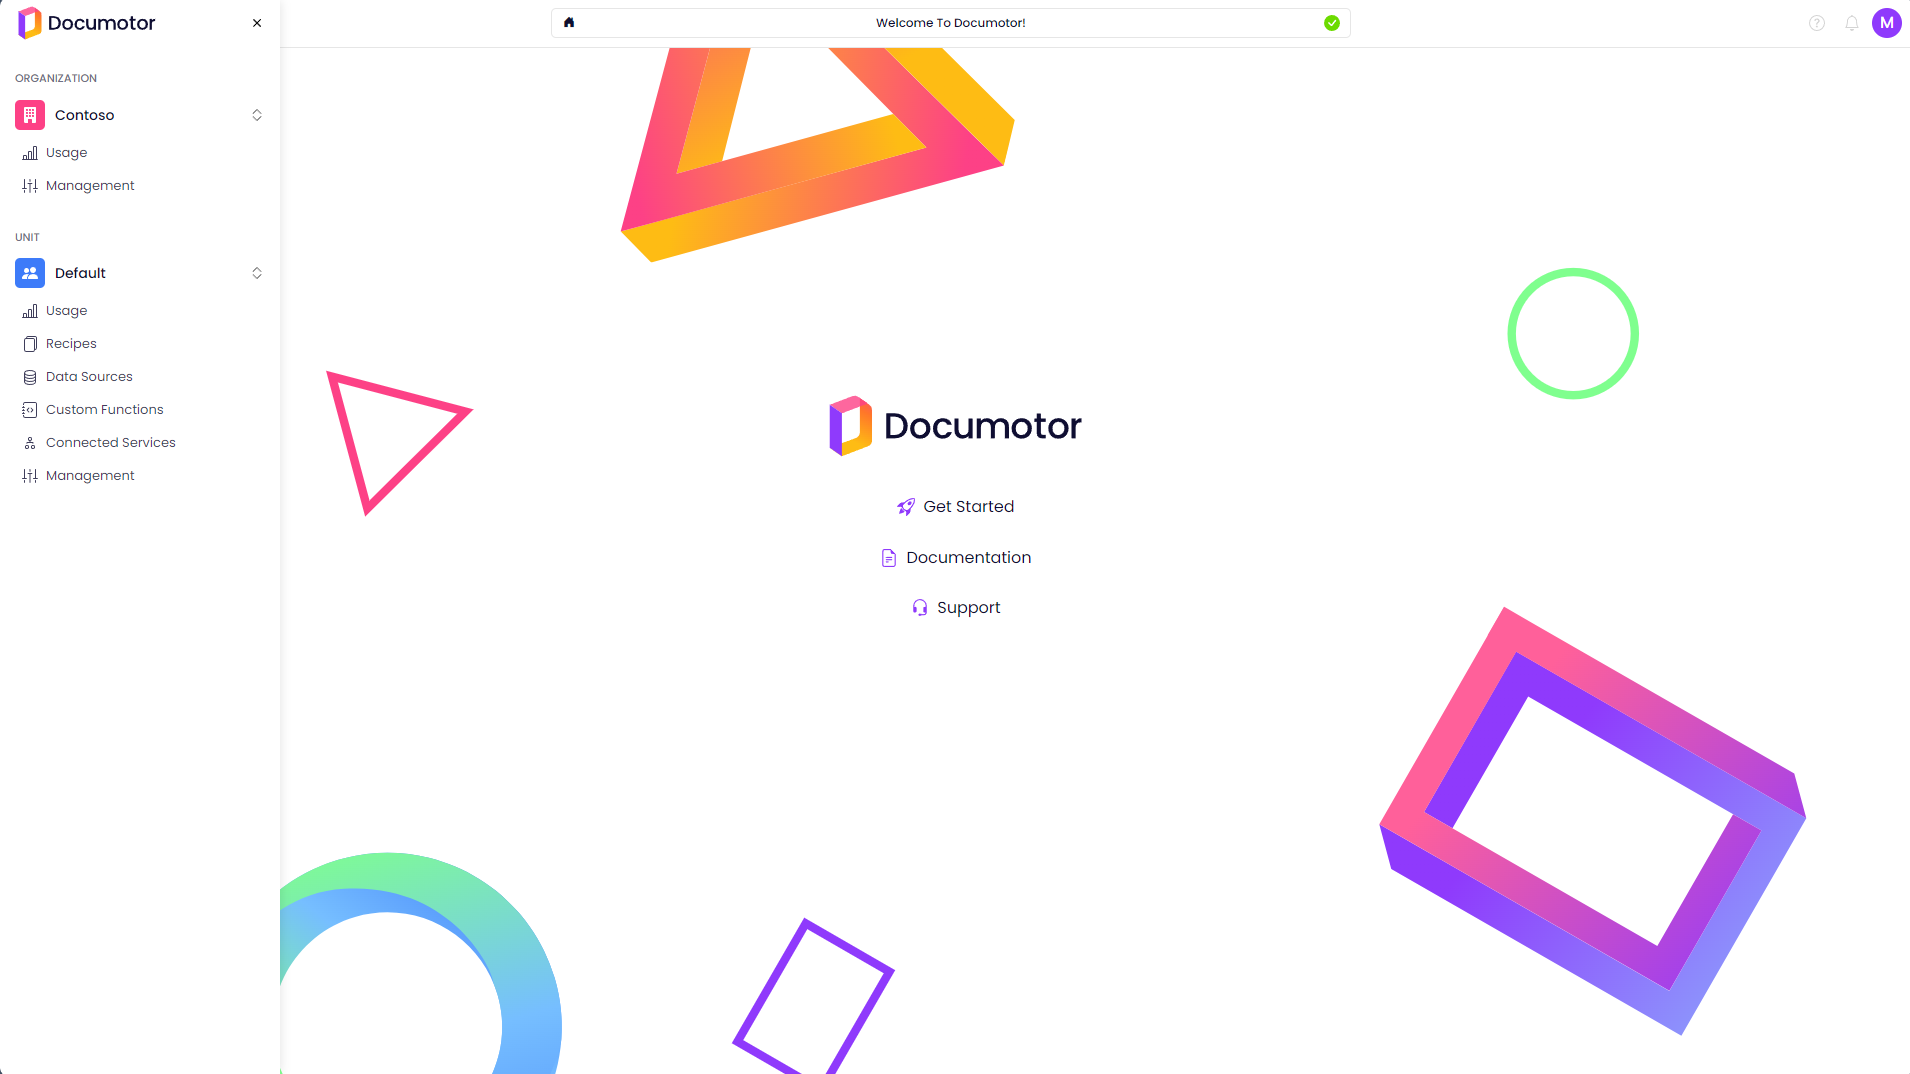 The homepage of Documotor after logging in.